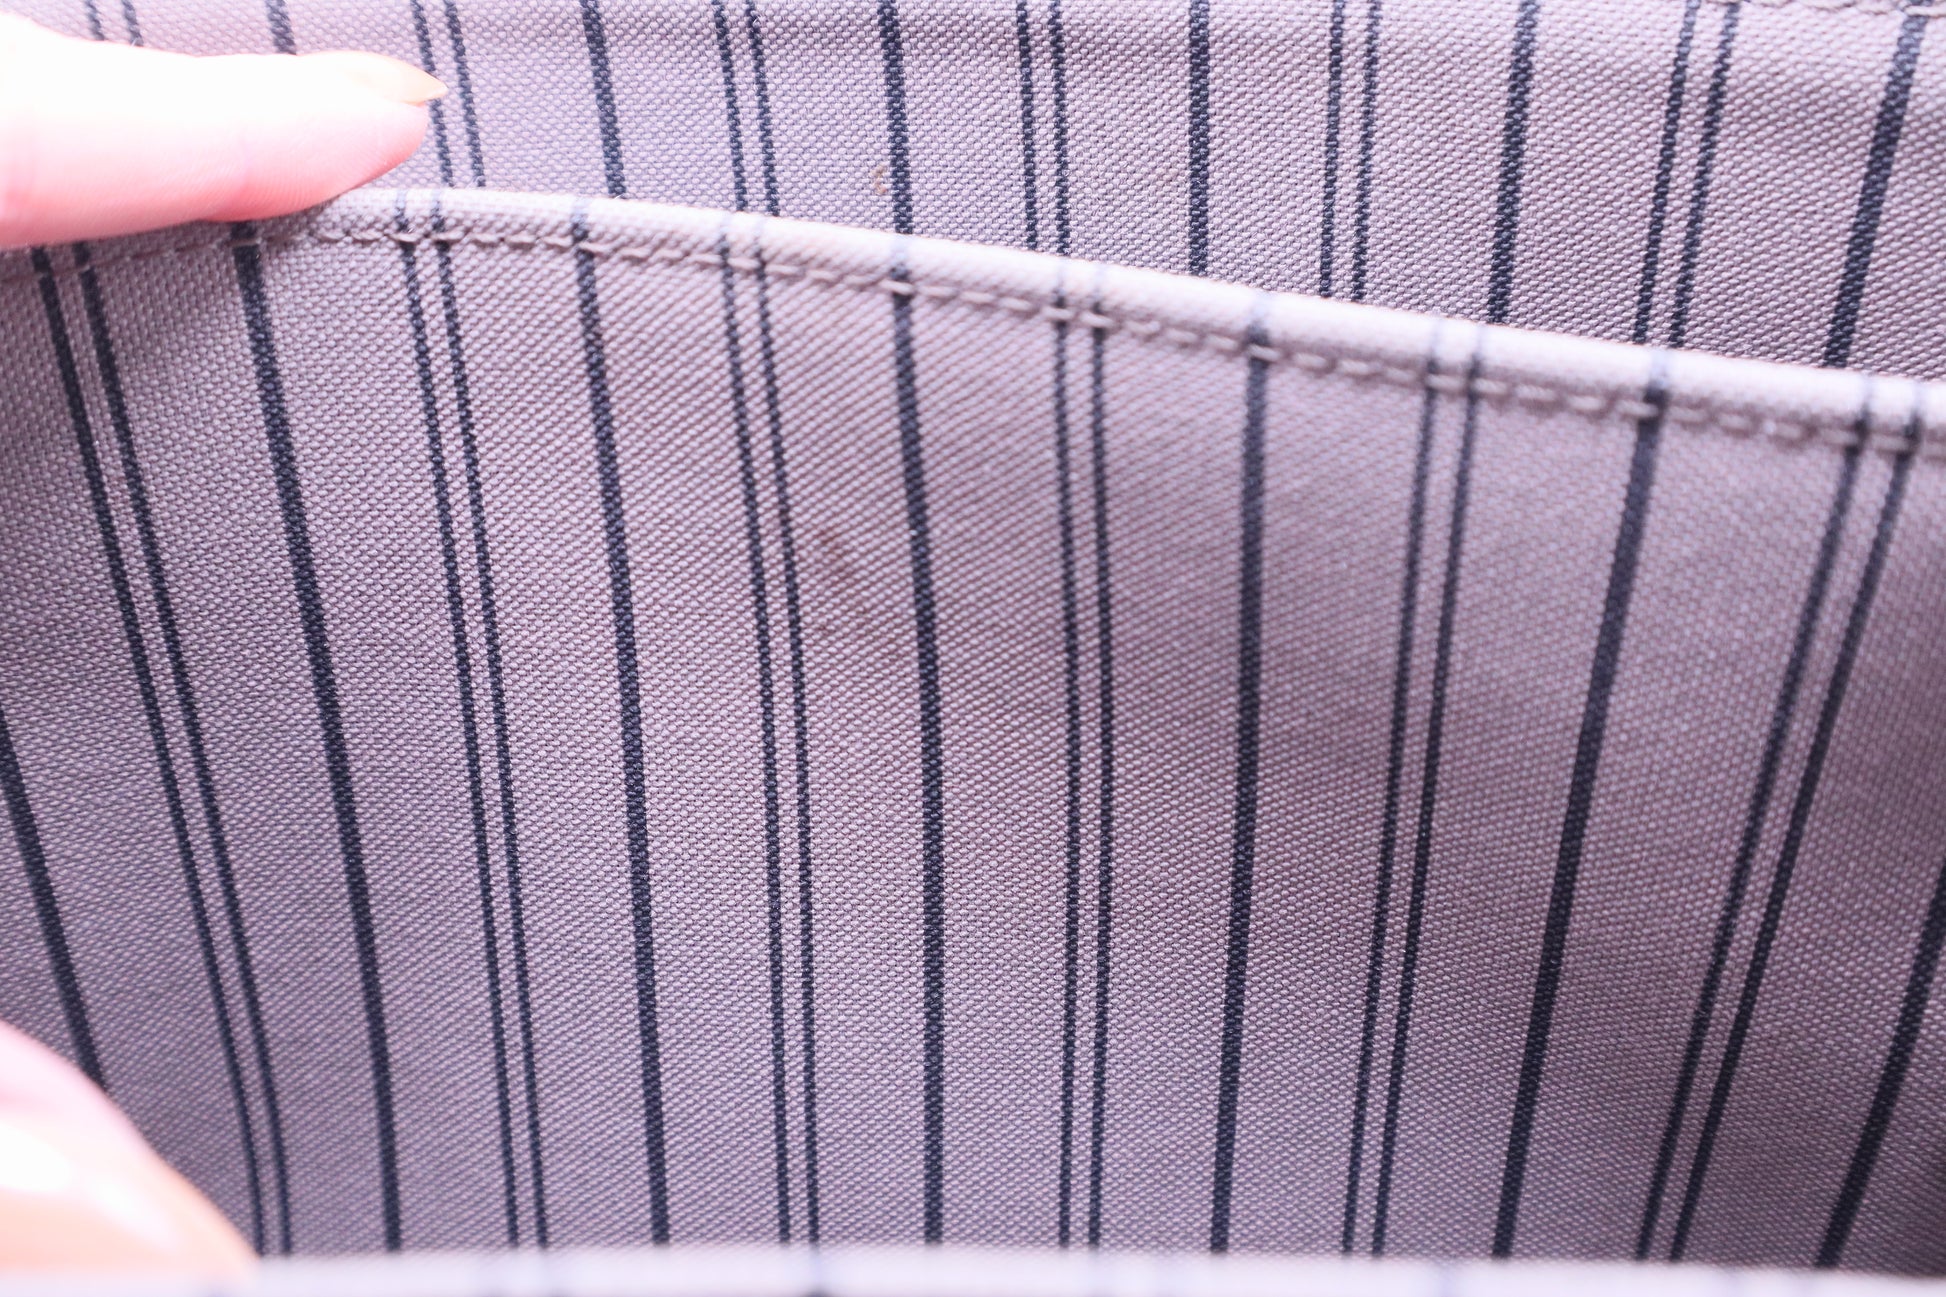 Inner pocket with small stain